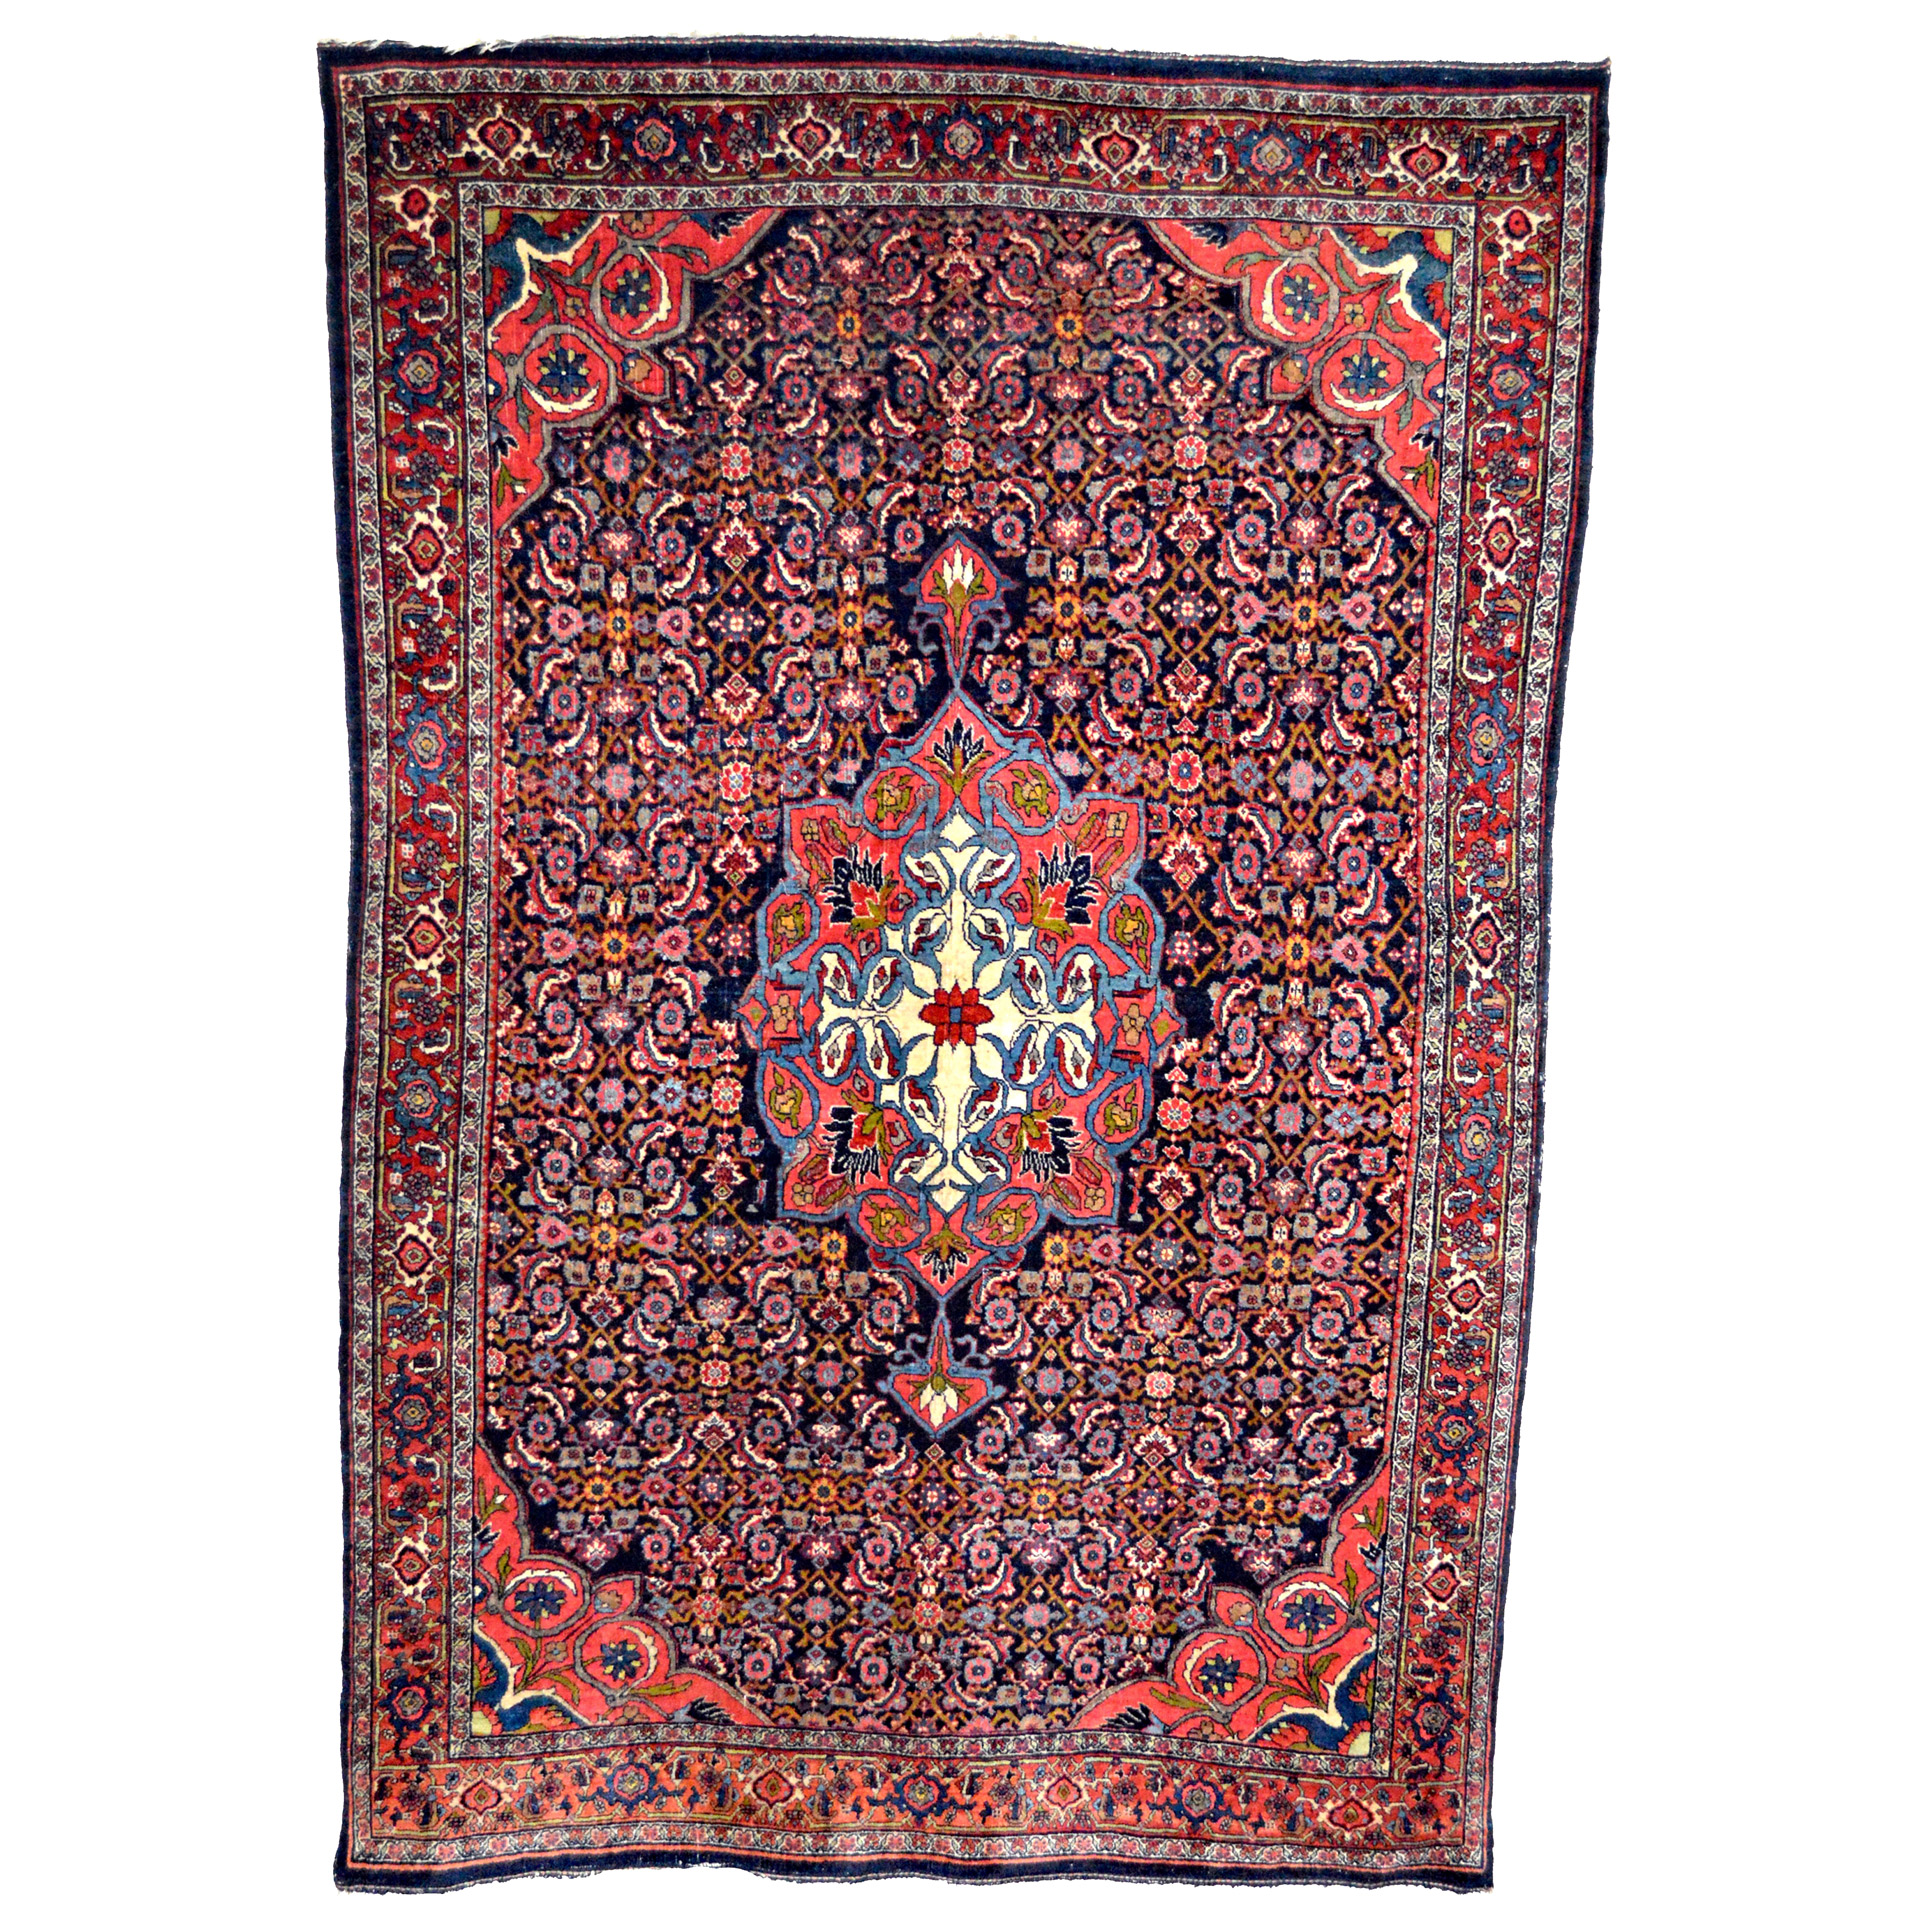 Antique Persian Bidjar rug with a coral and ivory medallion on a navy blue, Herati design field - Douglas Stock Gallery, Oriental Rugs Boston,MA area, antique rugs South Natick,MA, New England